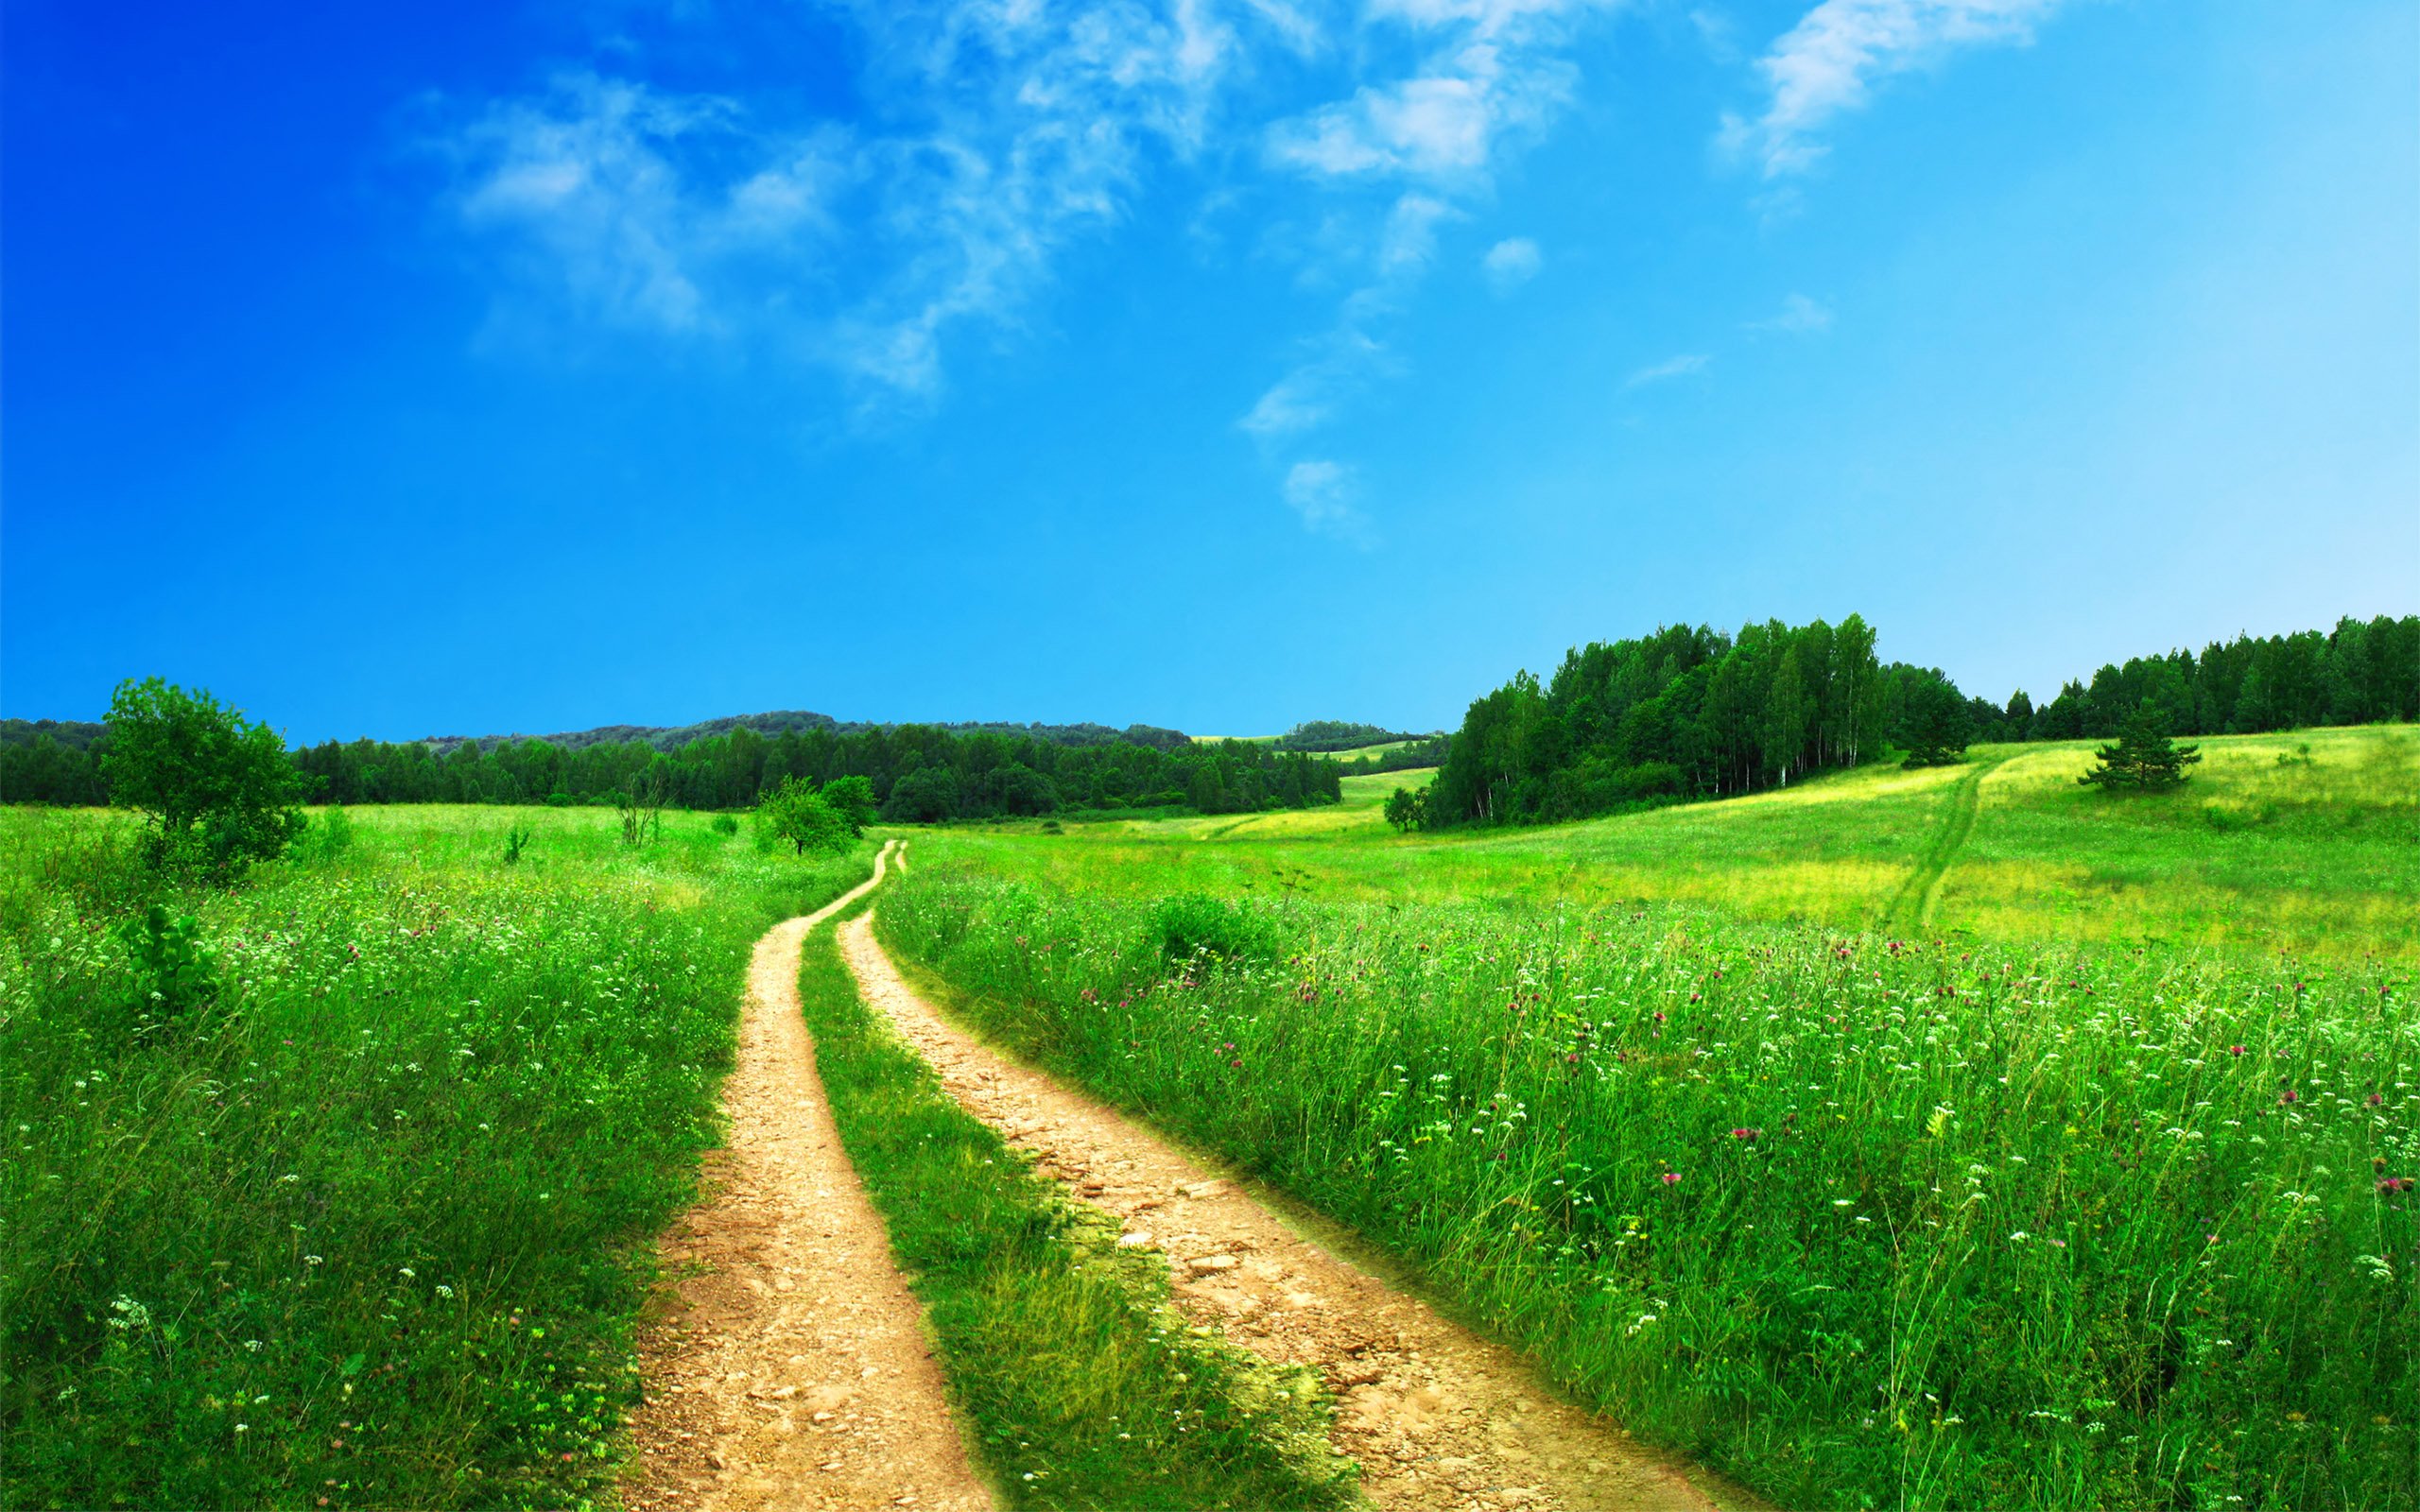 Scenic path through a grassy meadow in nature